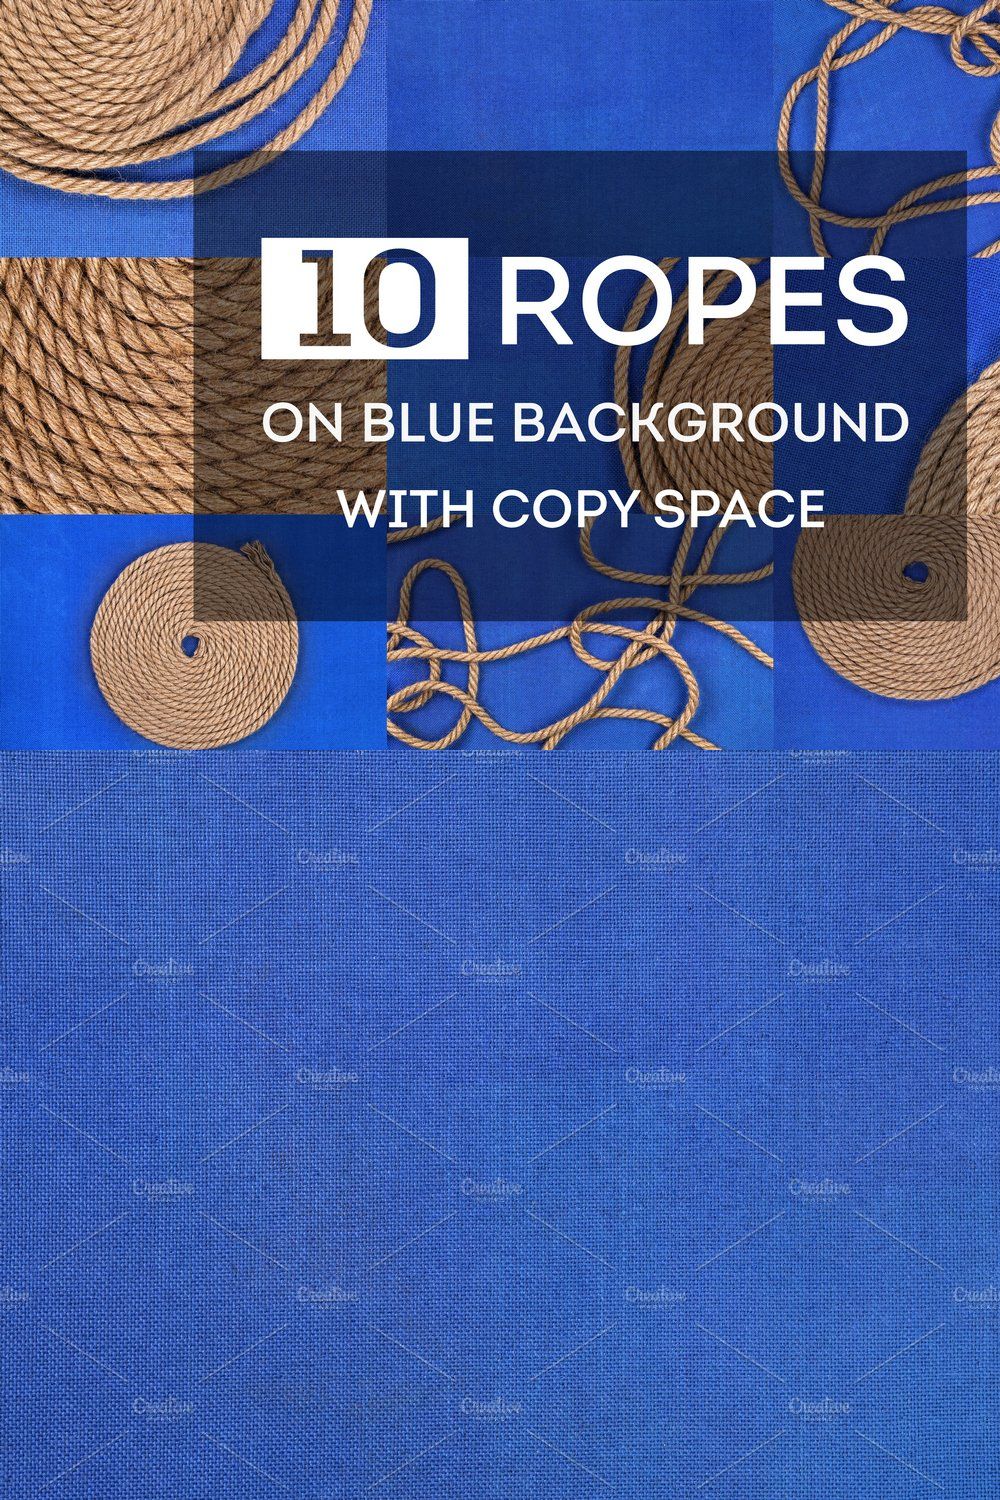 Ropes on blue background pinterest preview image.